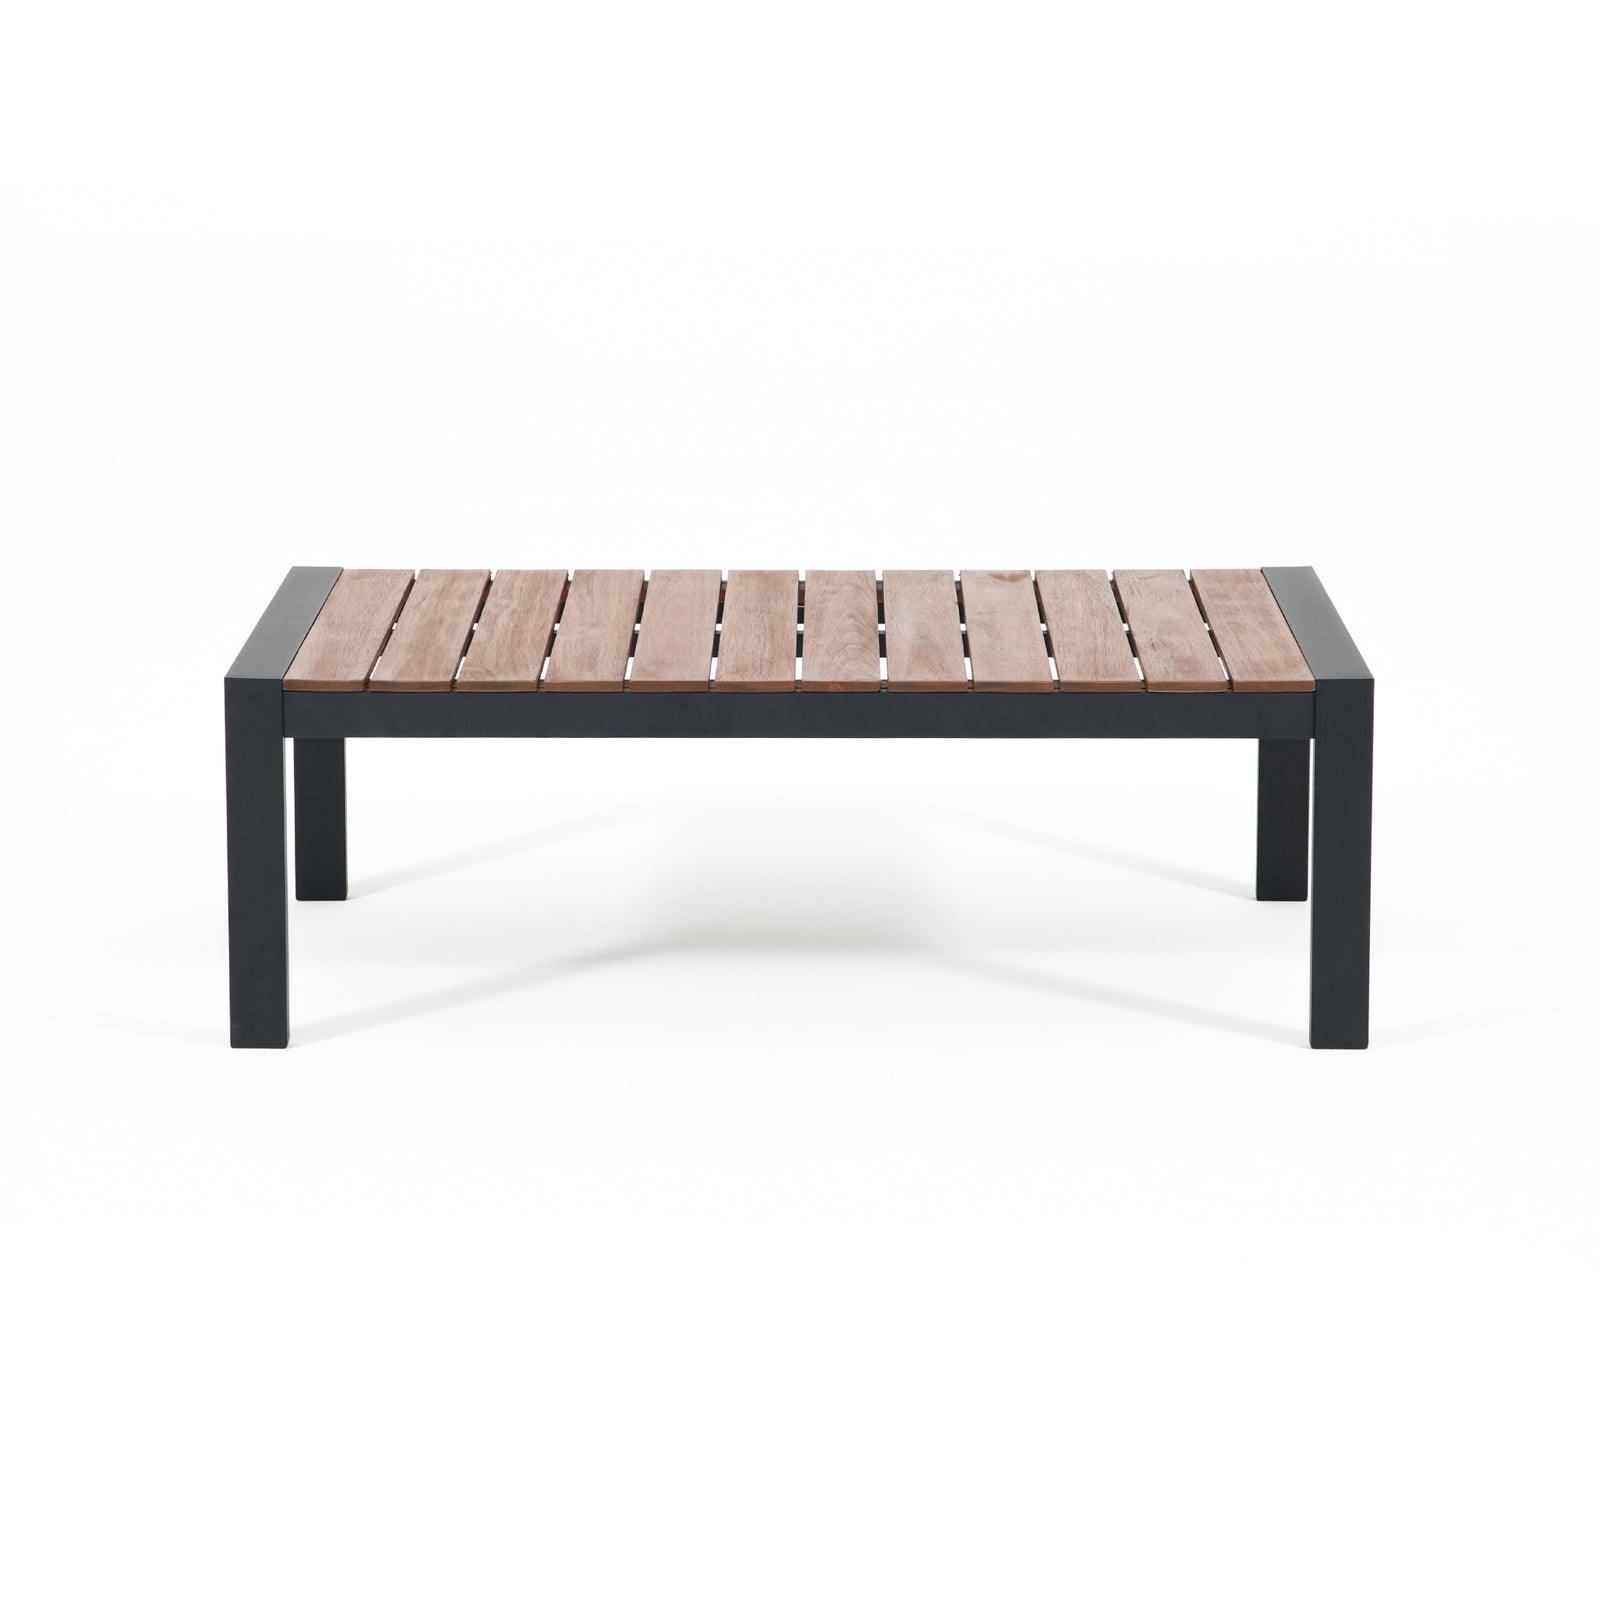 Ronda Modern Outdoor Coffee Table, Rectangular Aluminum Frame Accent Table with Wood Slat Top, Front view- Jardina Furniture